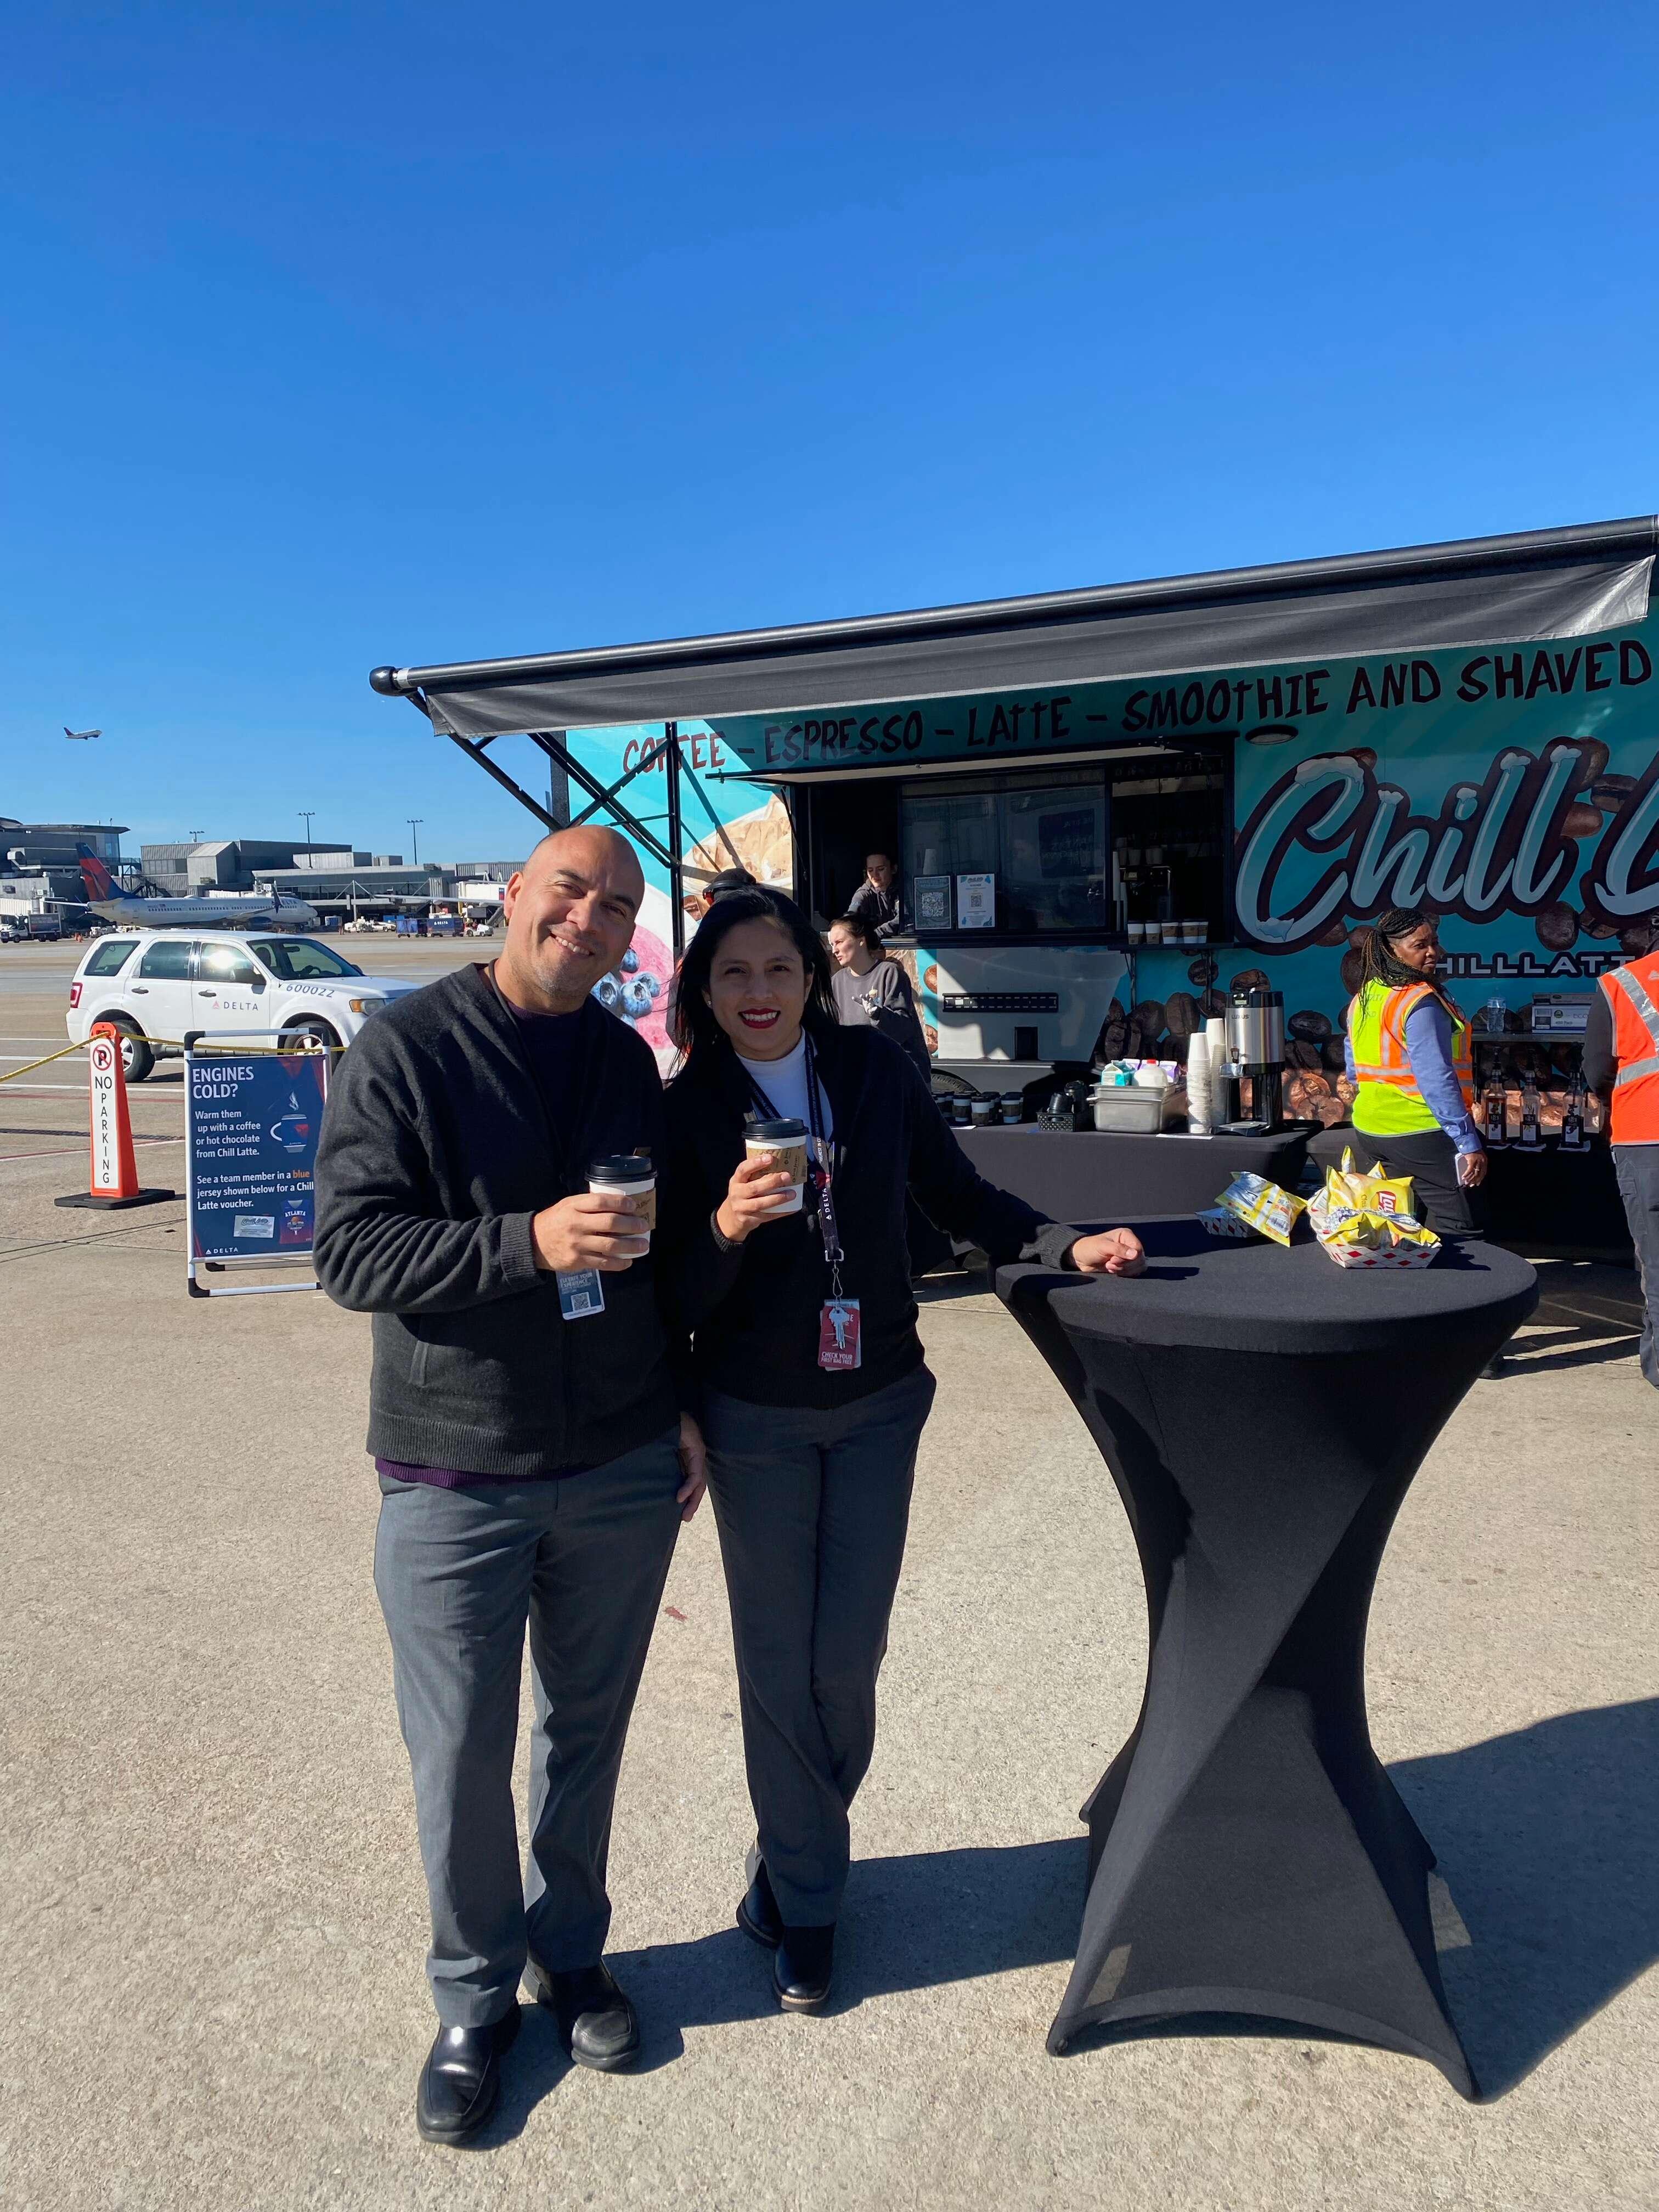 Delta employees at Delta airport with Chill Latte coffee cups 